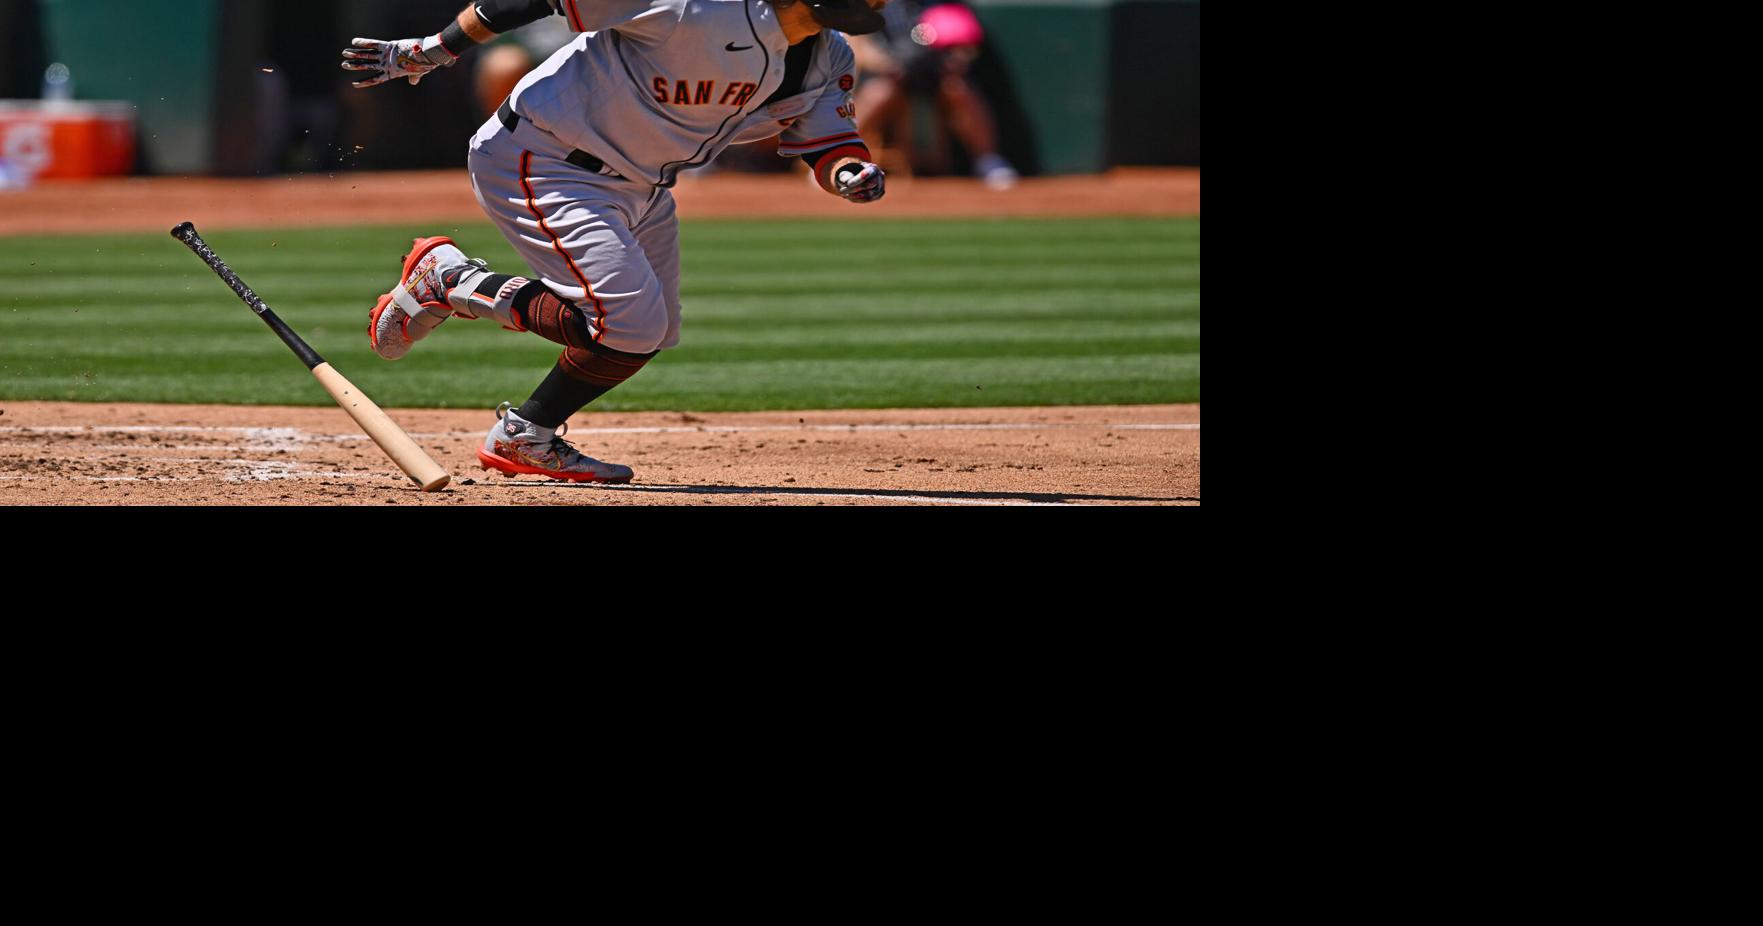 Day in the life with Giants' Brandon Crawford: Sheltering in a busy place